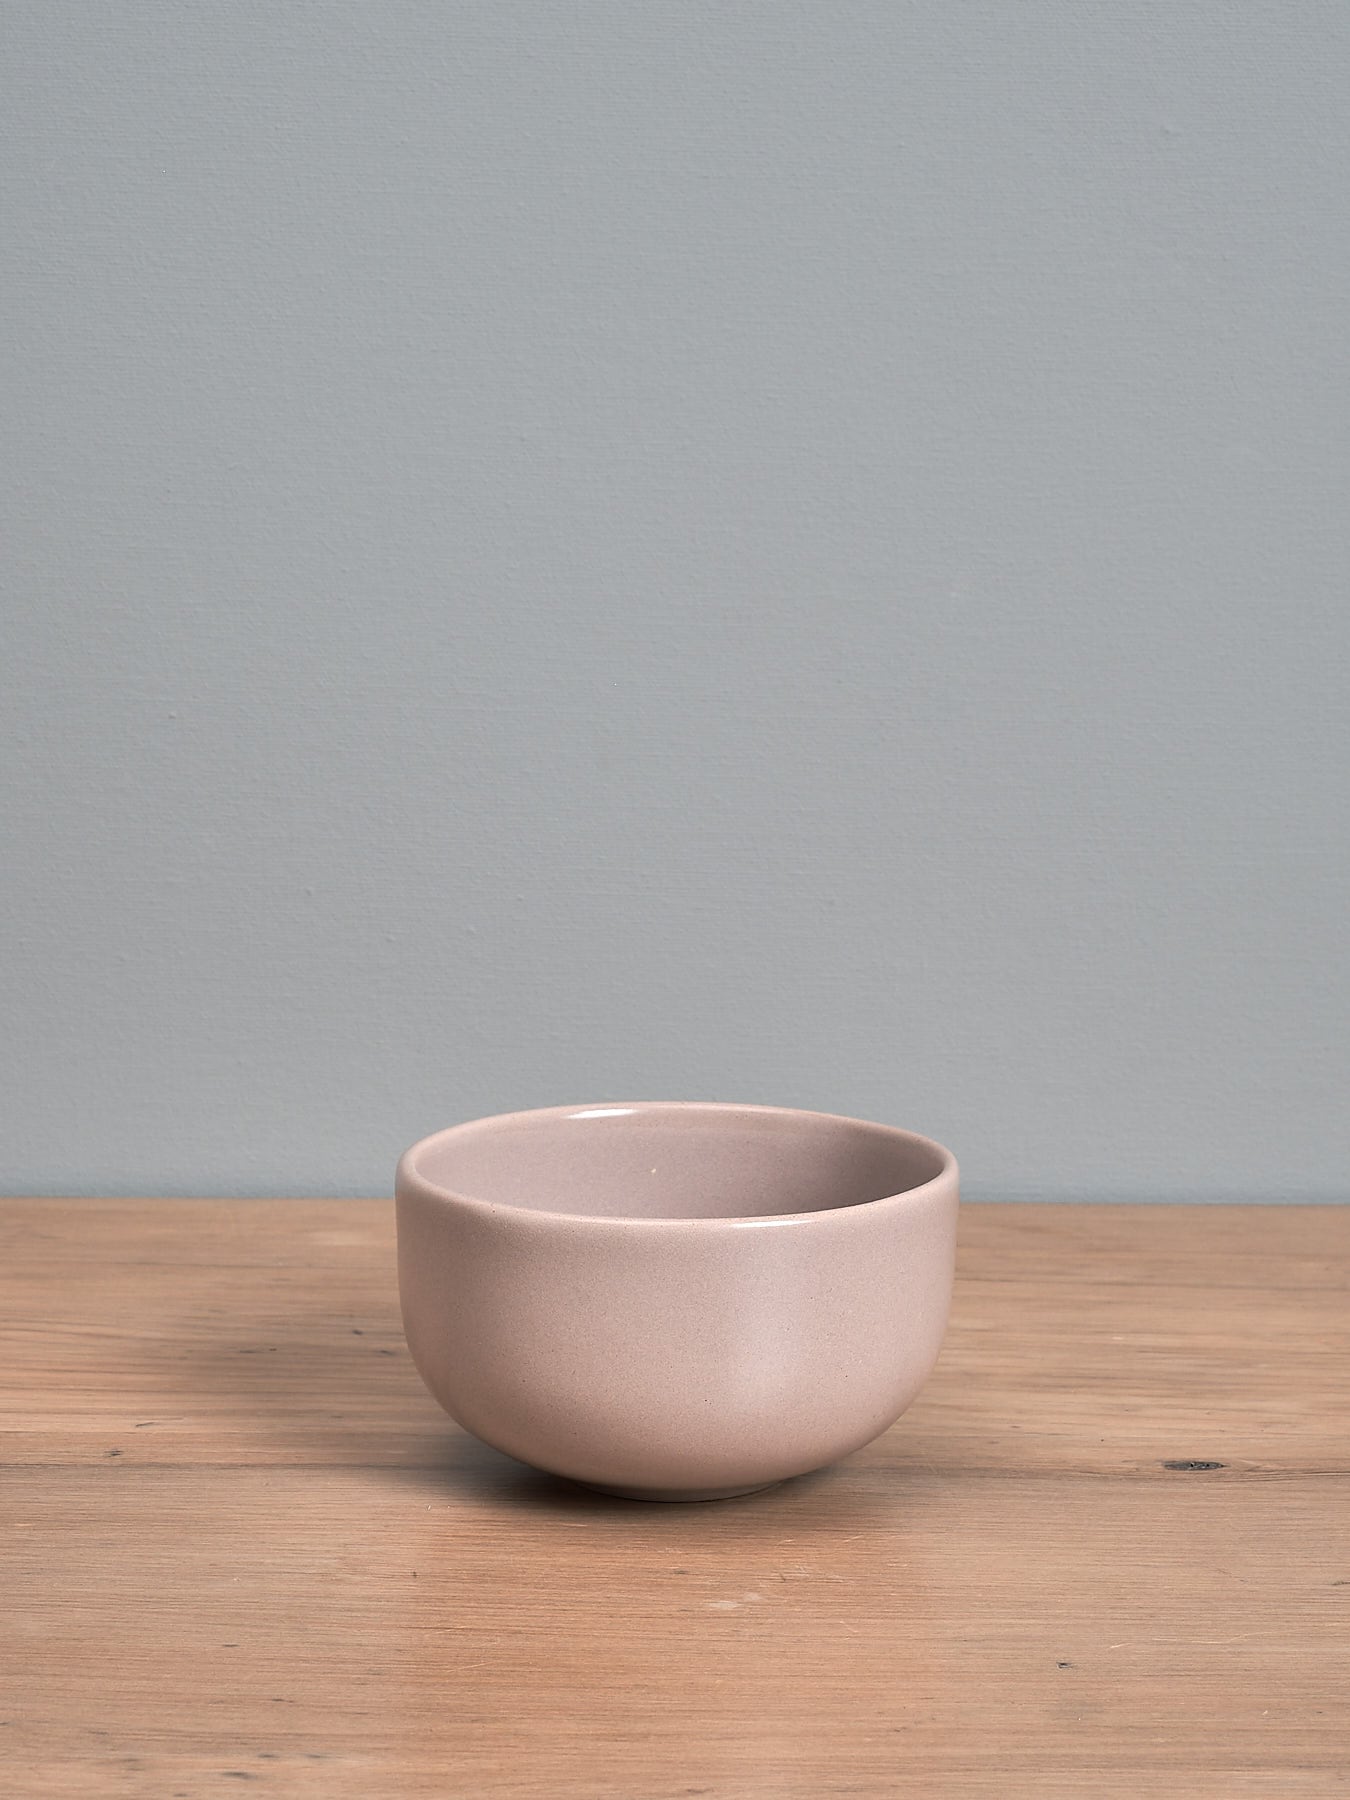 An Olive Bowl - Dusty Pink by Gidon Bing sitting on top of a wooden table.